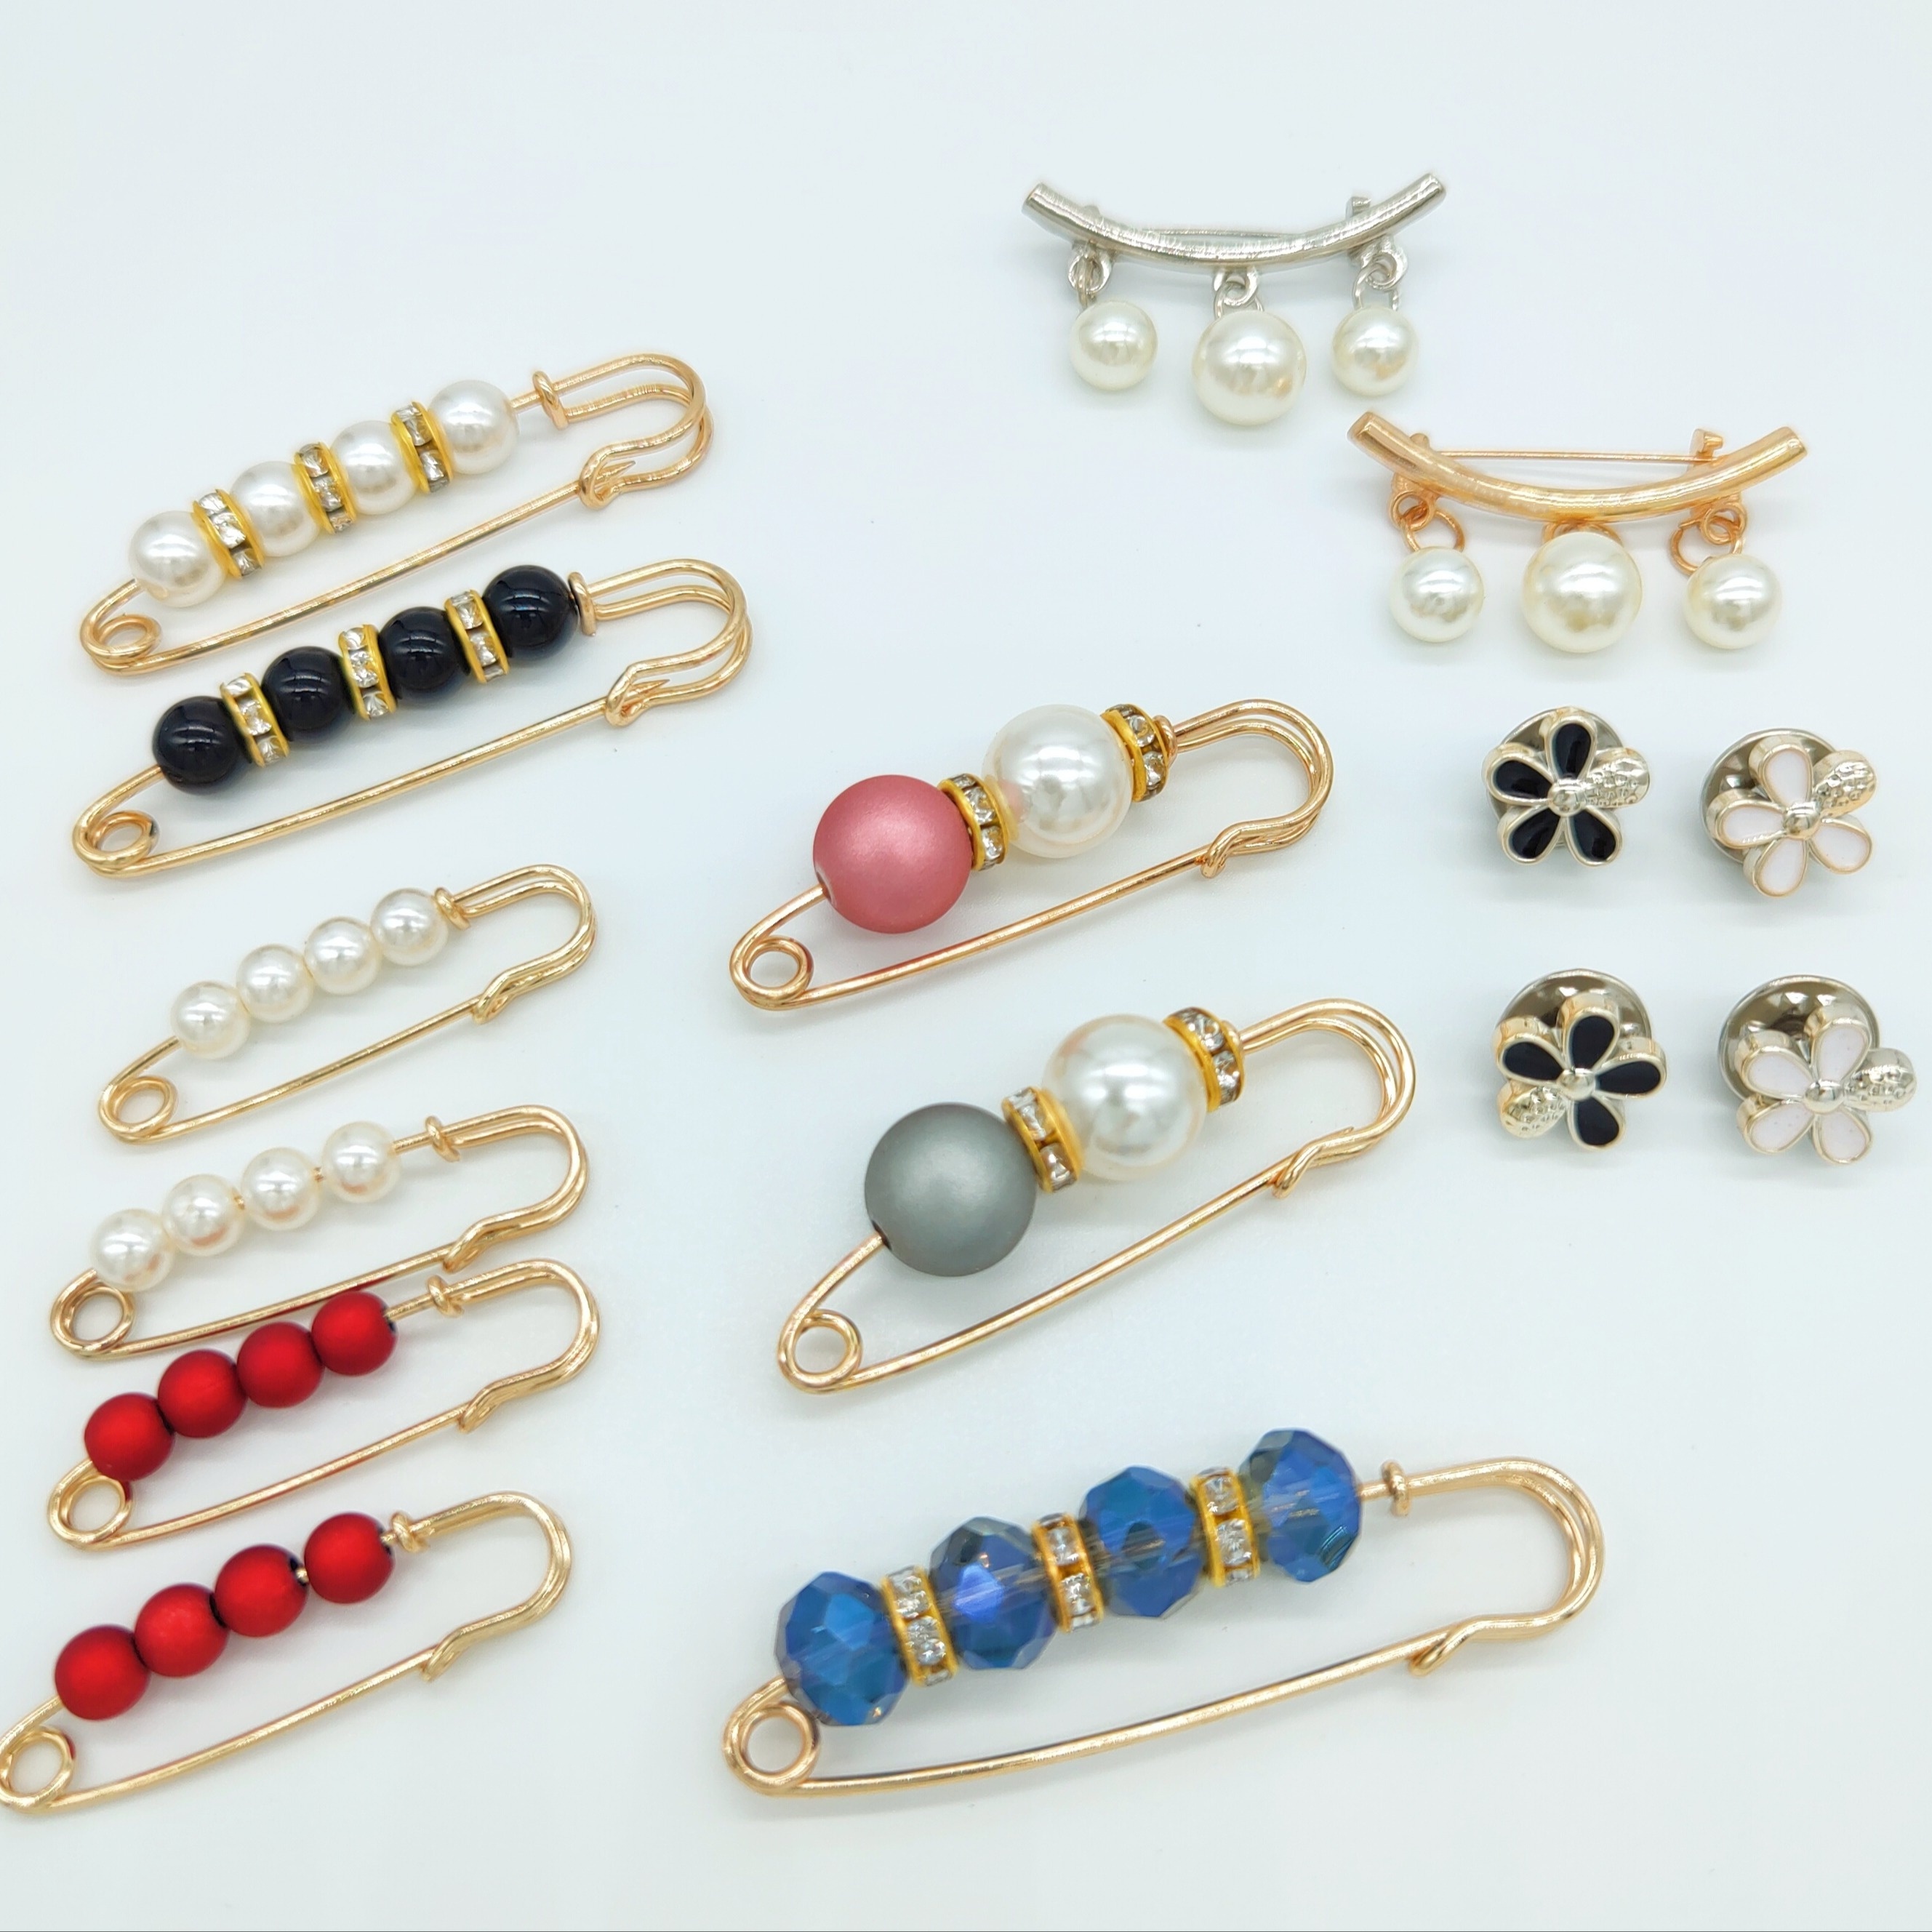 Pins Brooches Fashion Jewelry Art Crafts Repurpose Lot of 9